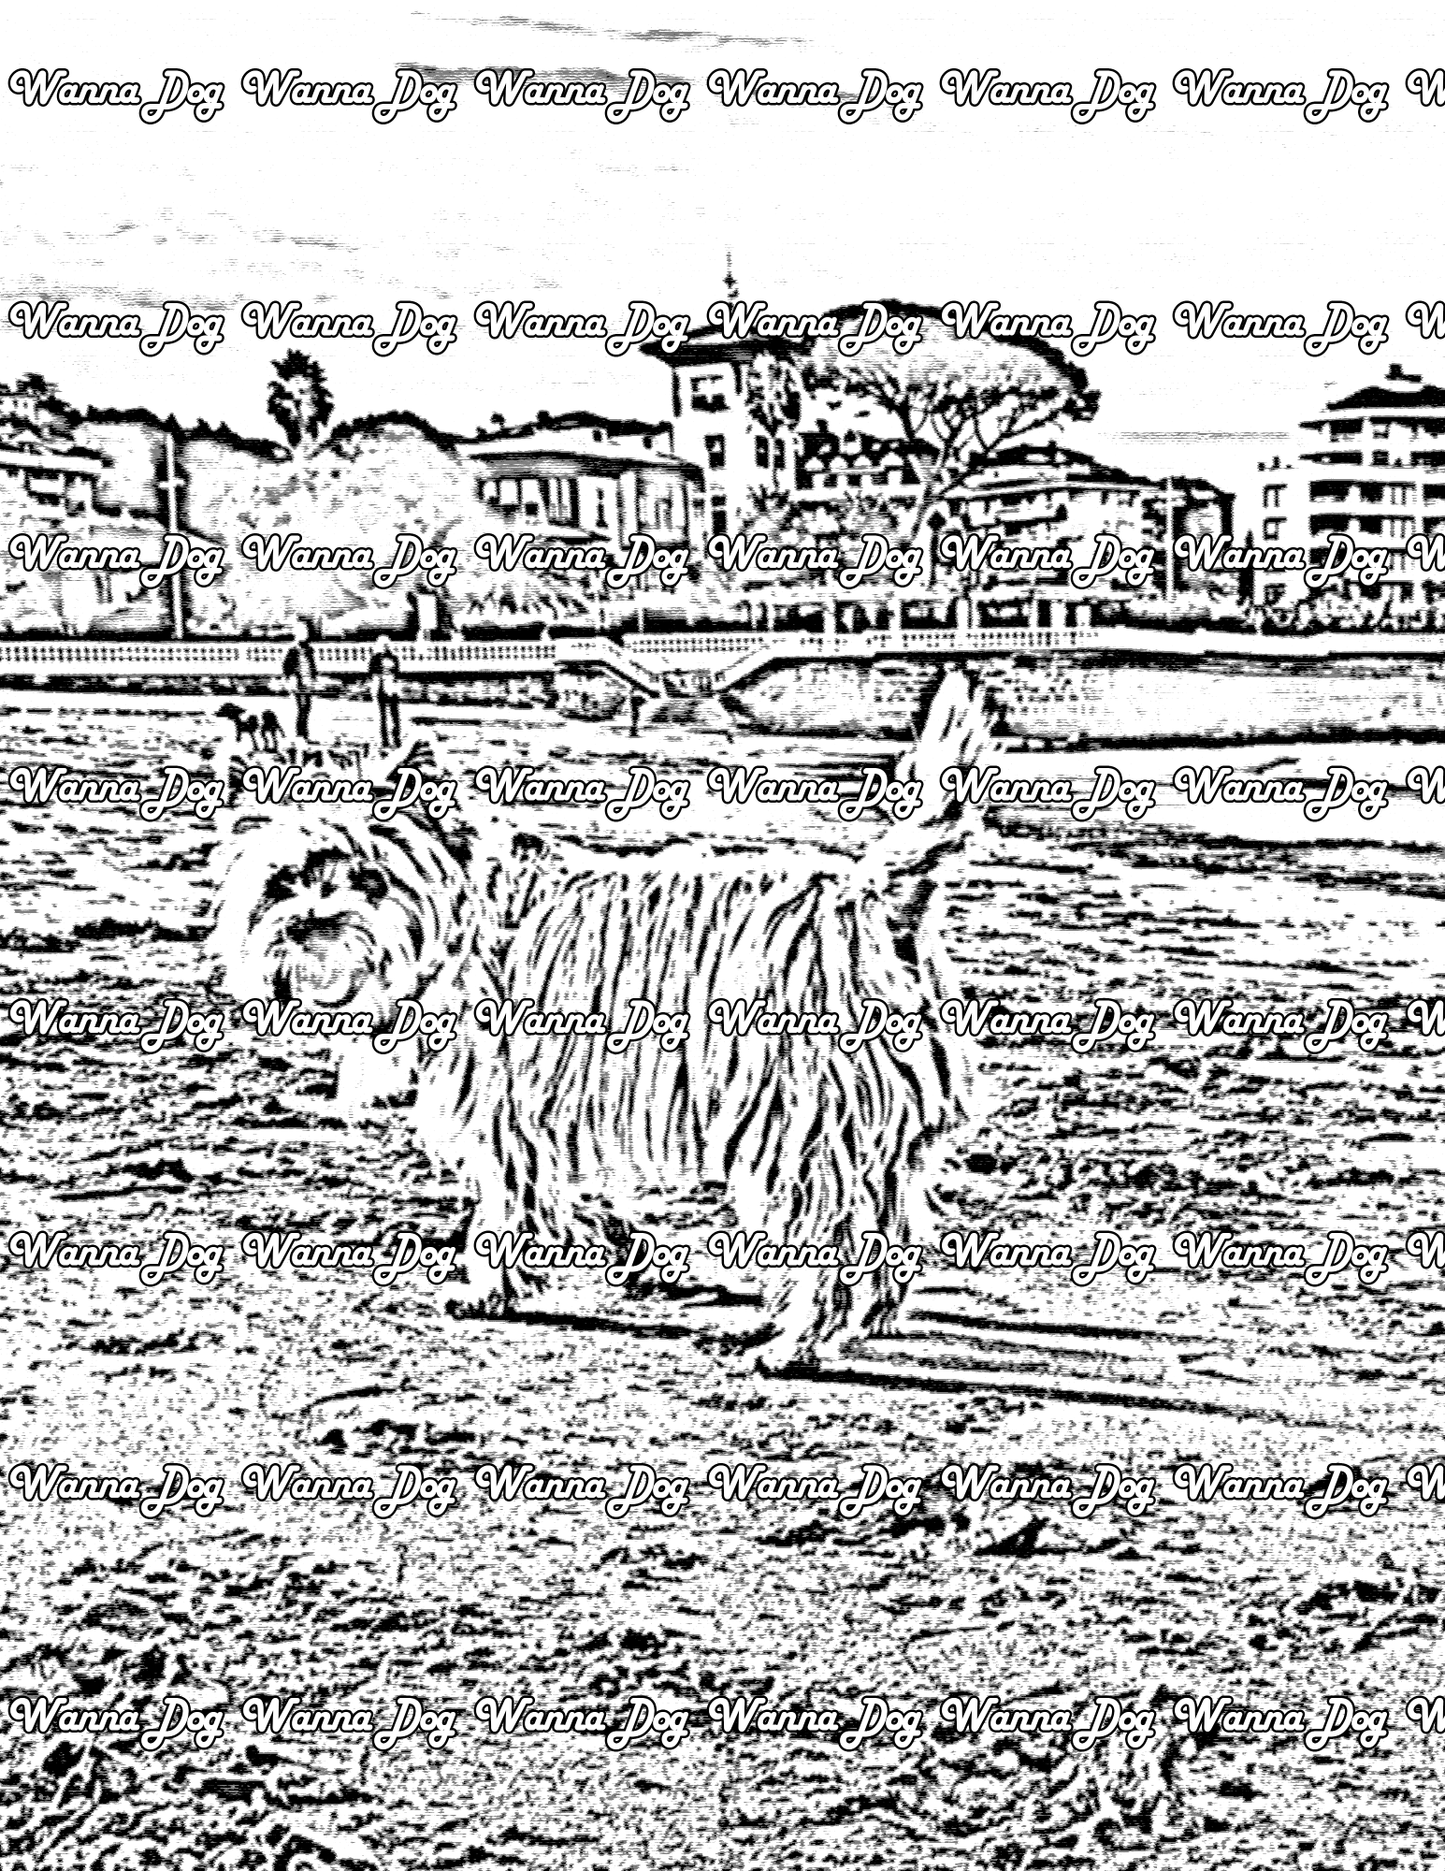 Cairn Terrier Coloring Page of a Cairn Terrier at the beach